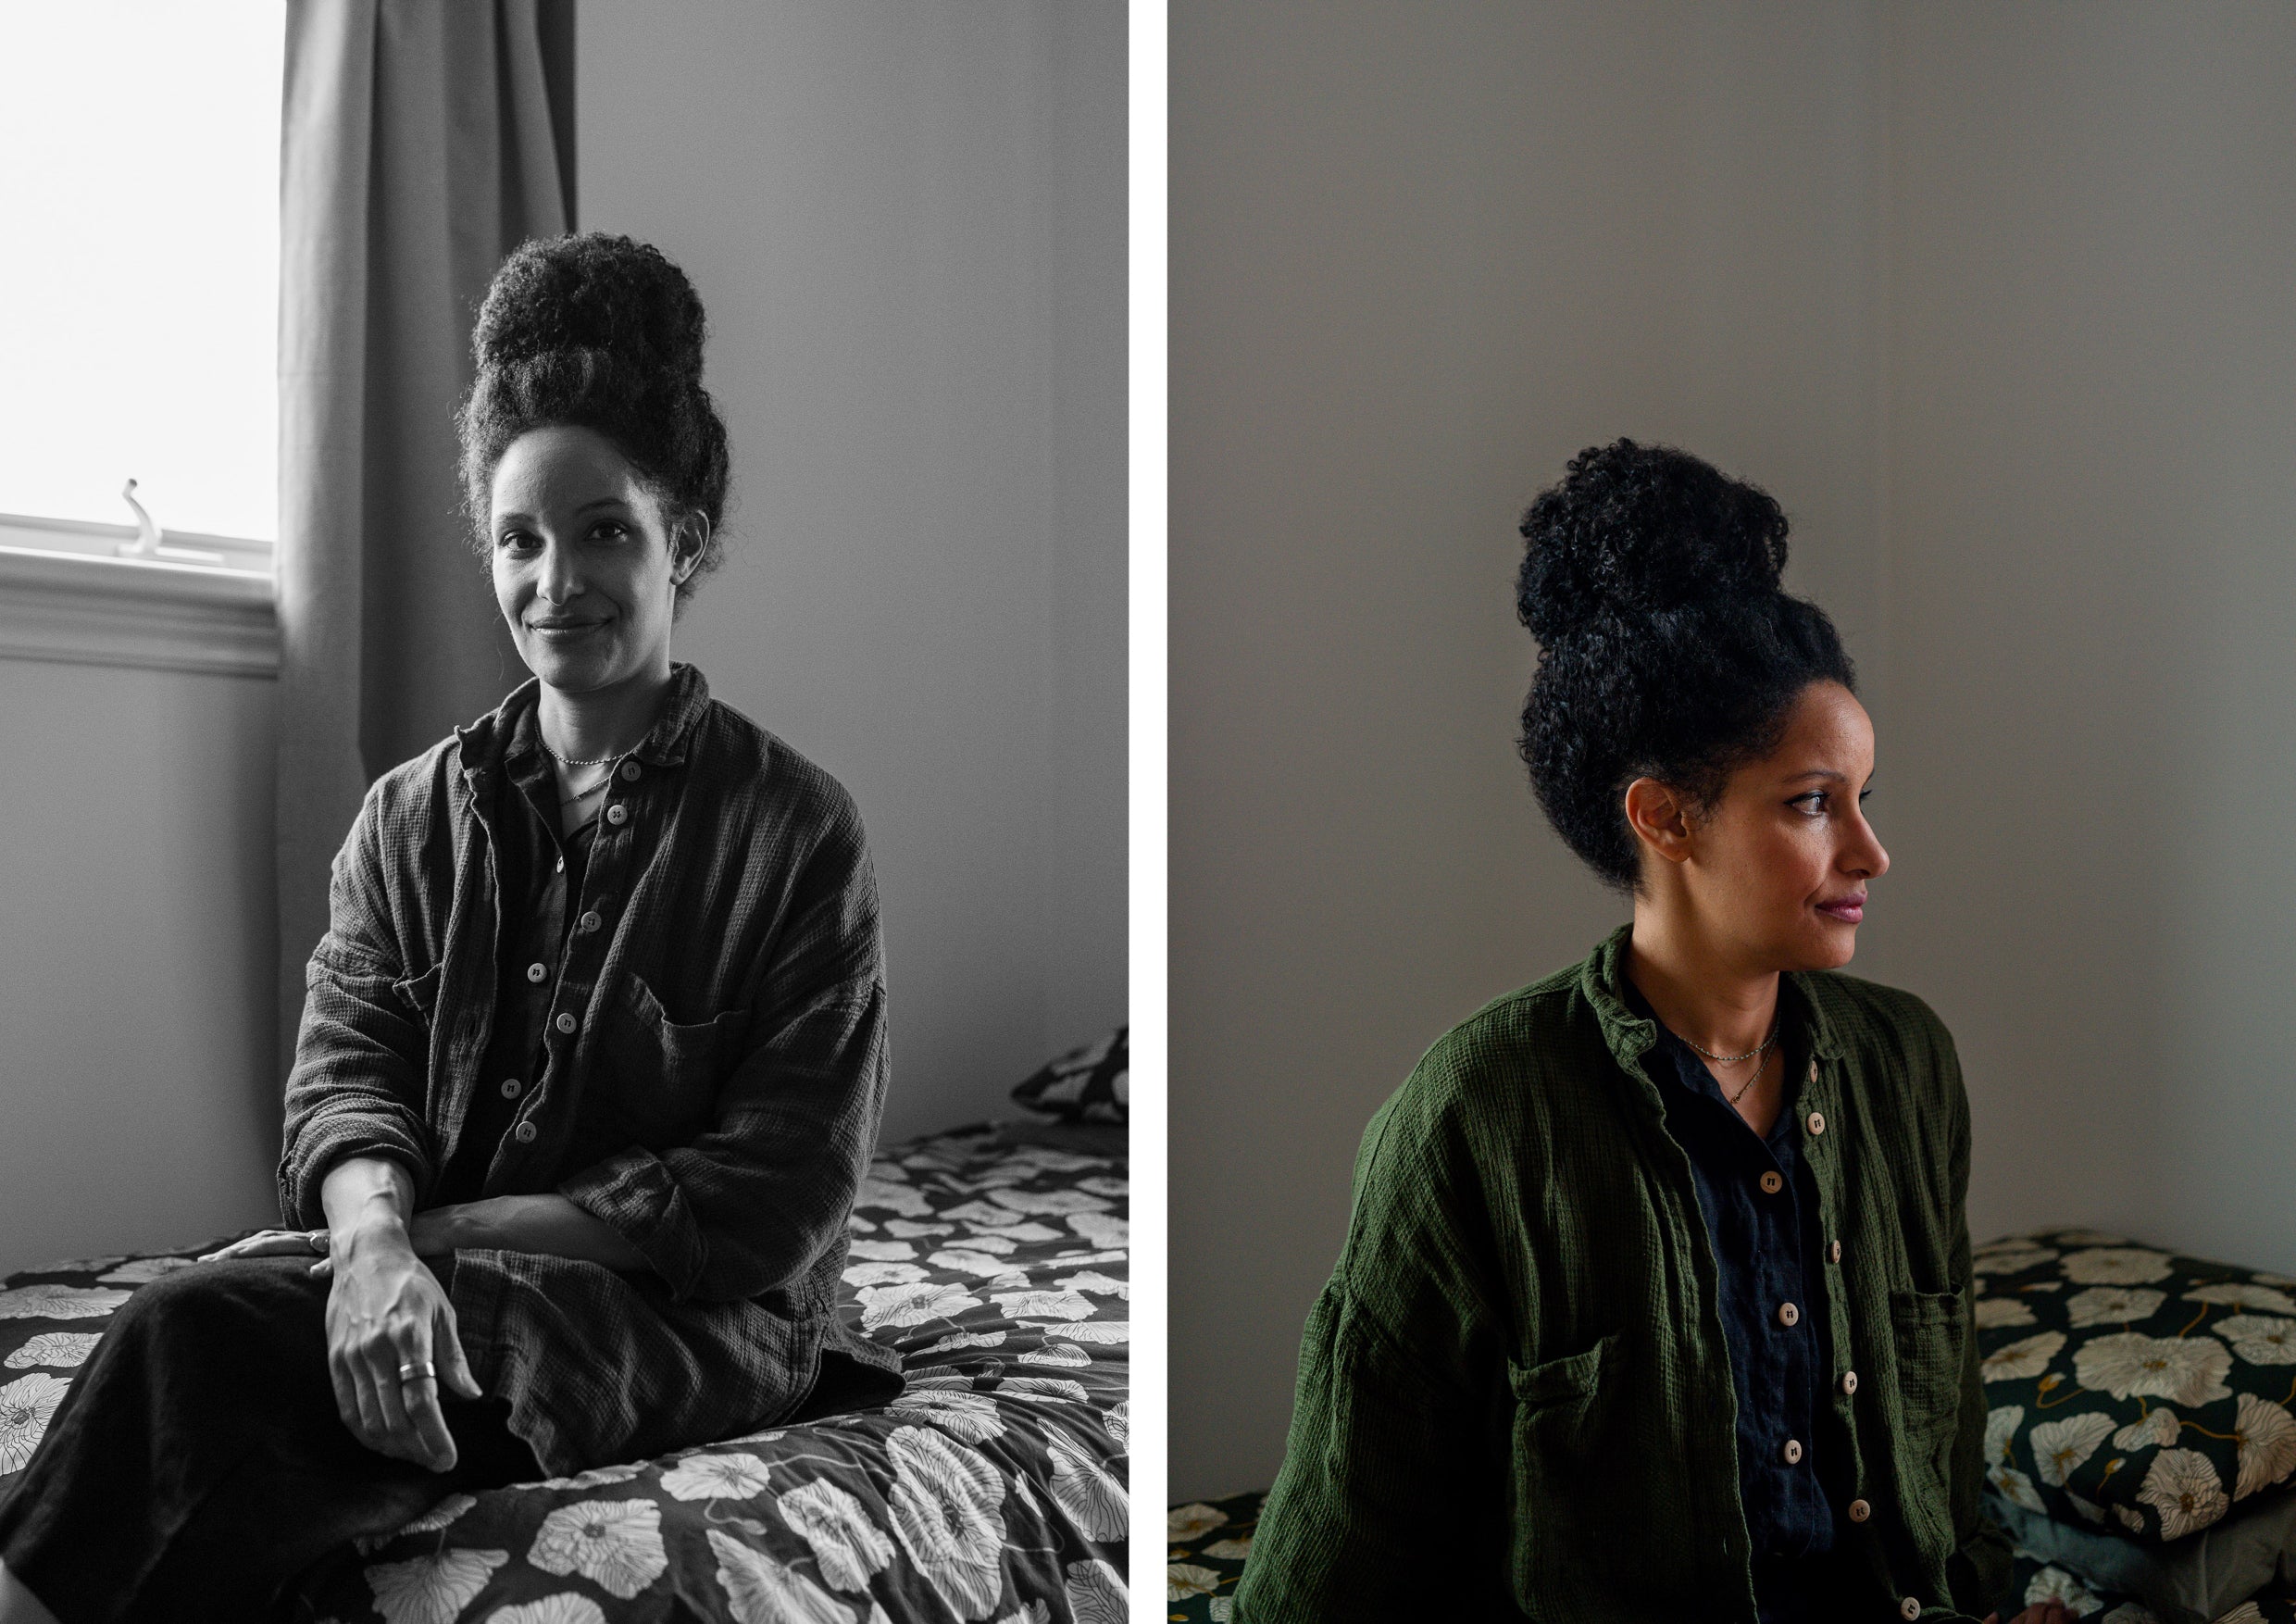 Portraits of a woman sat on a bed